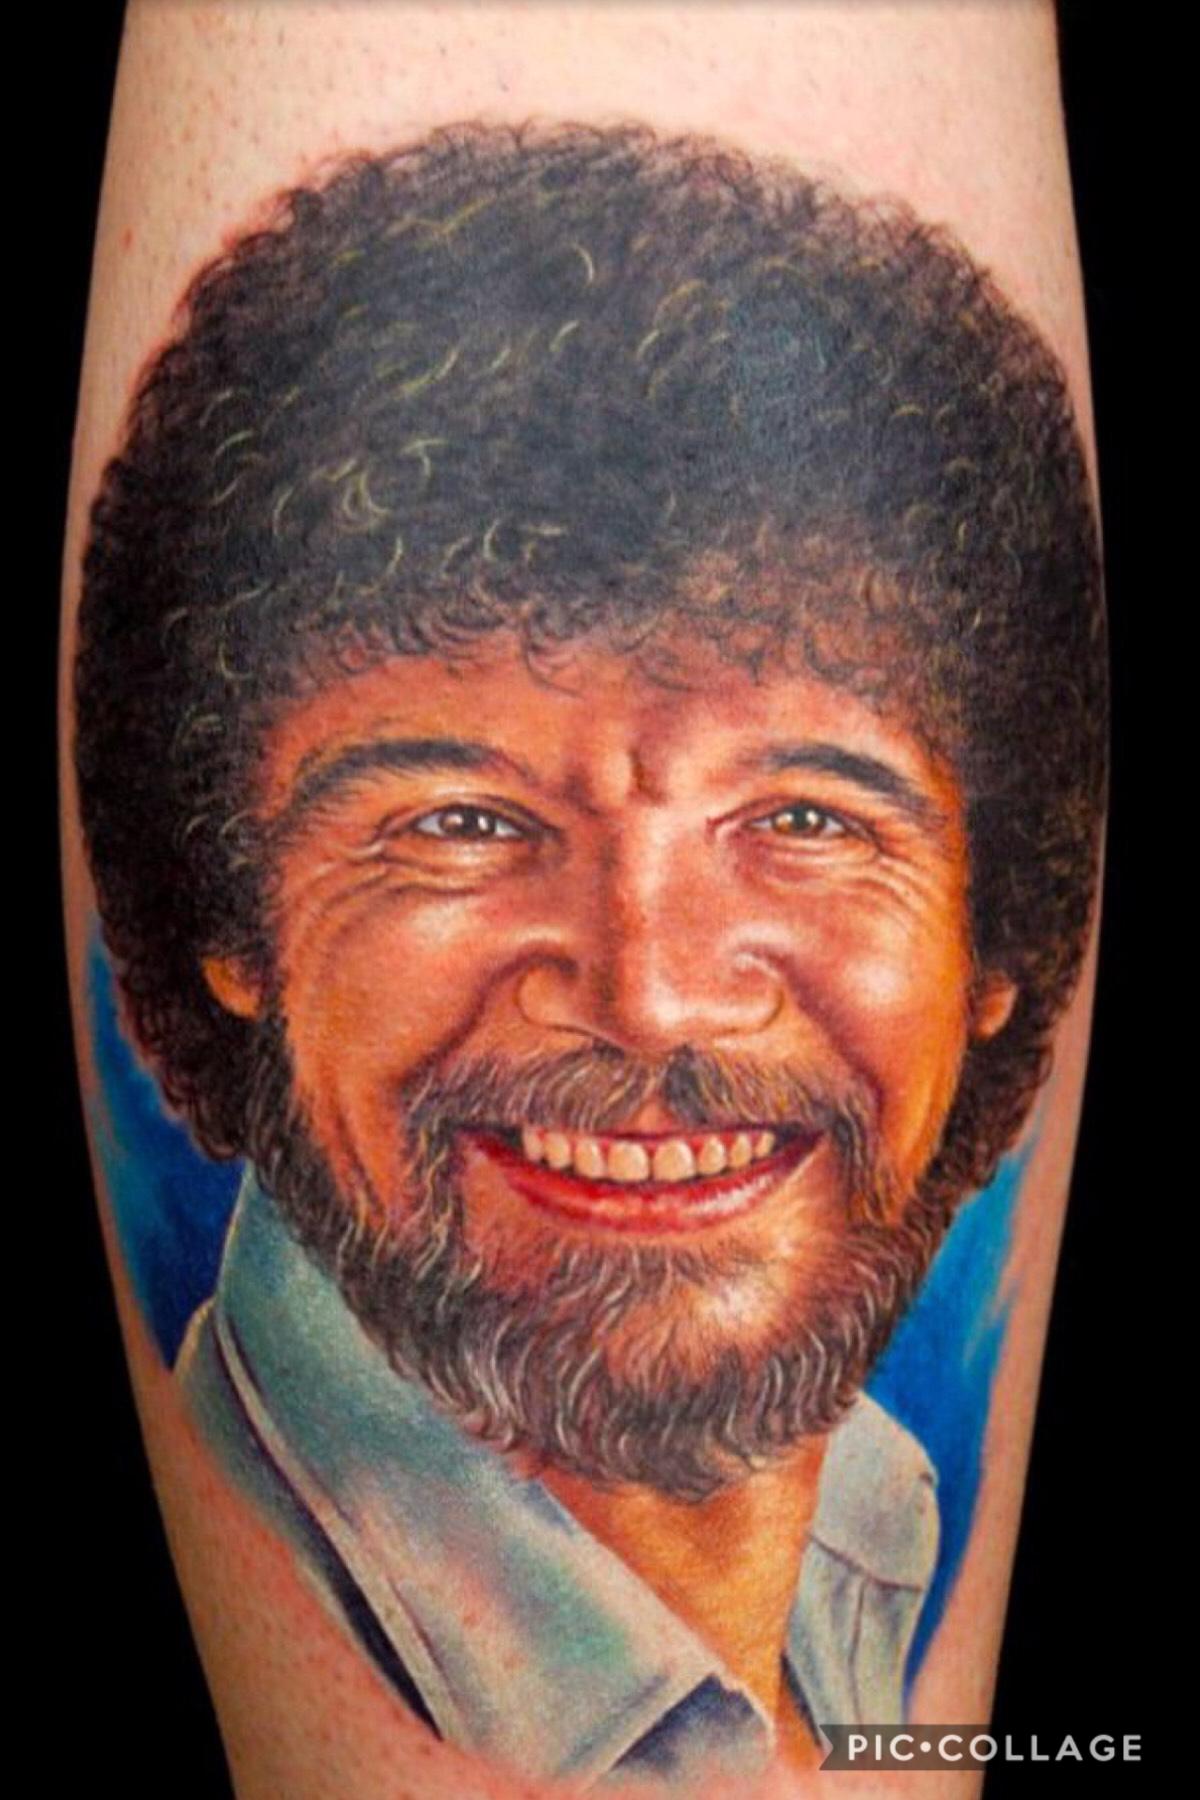 This isn’t a collage... someone got a tattoo of Bob Ross! That’s a true fan🌲